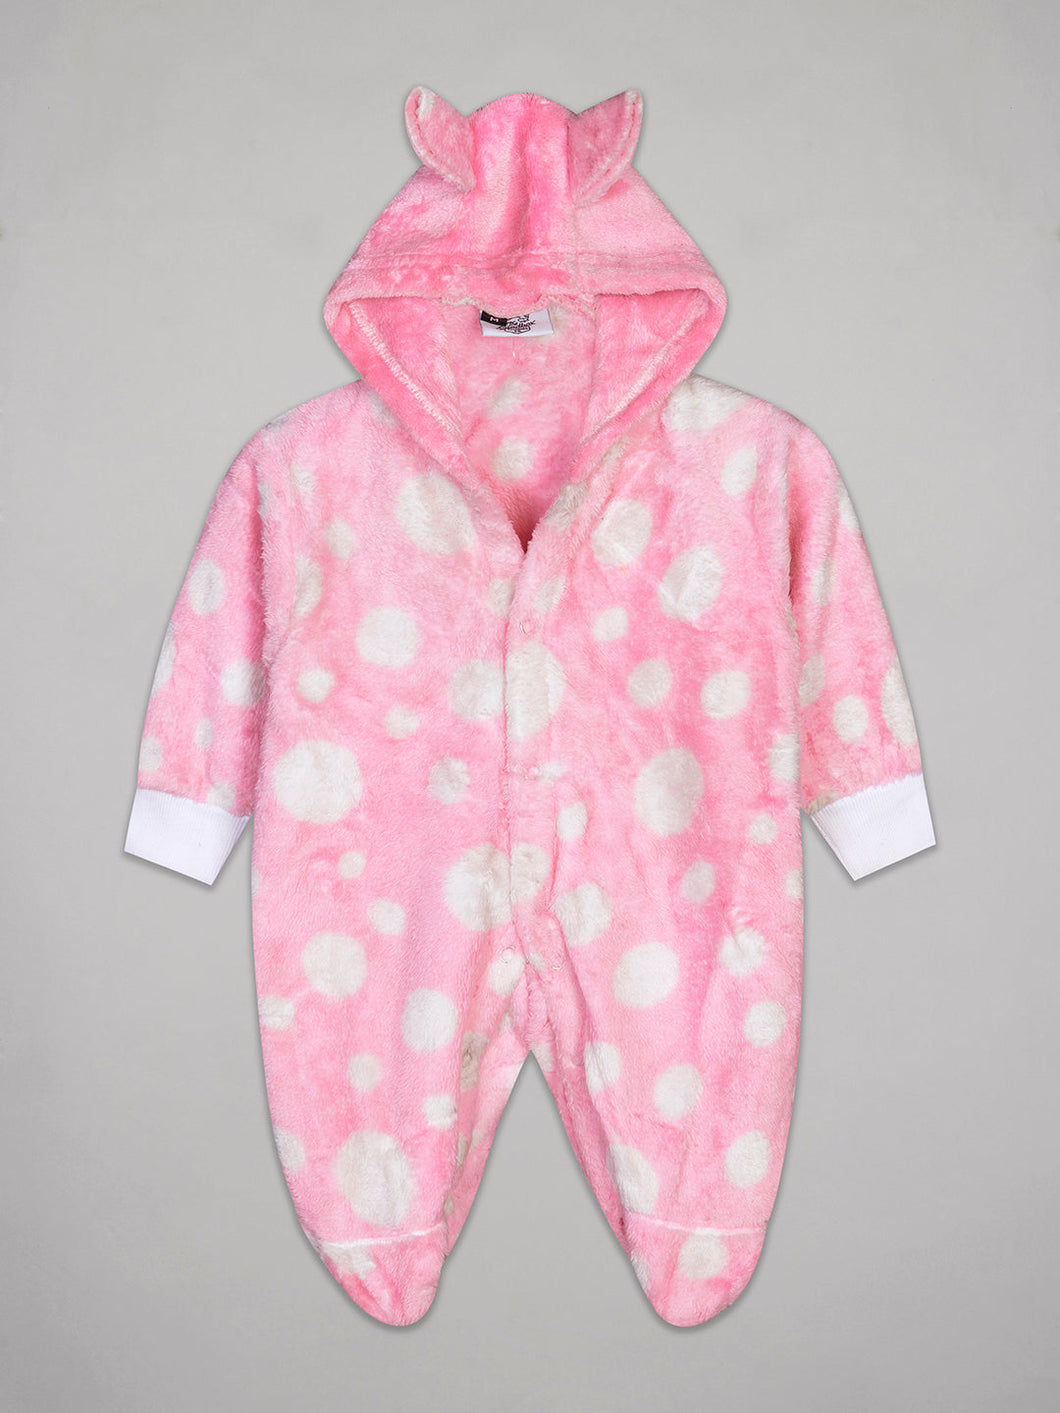 The Sandbox Clothing Co. Winter Rompers RM283